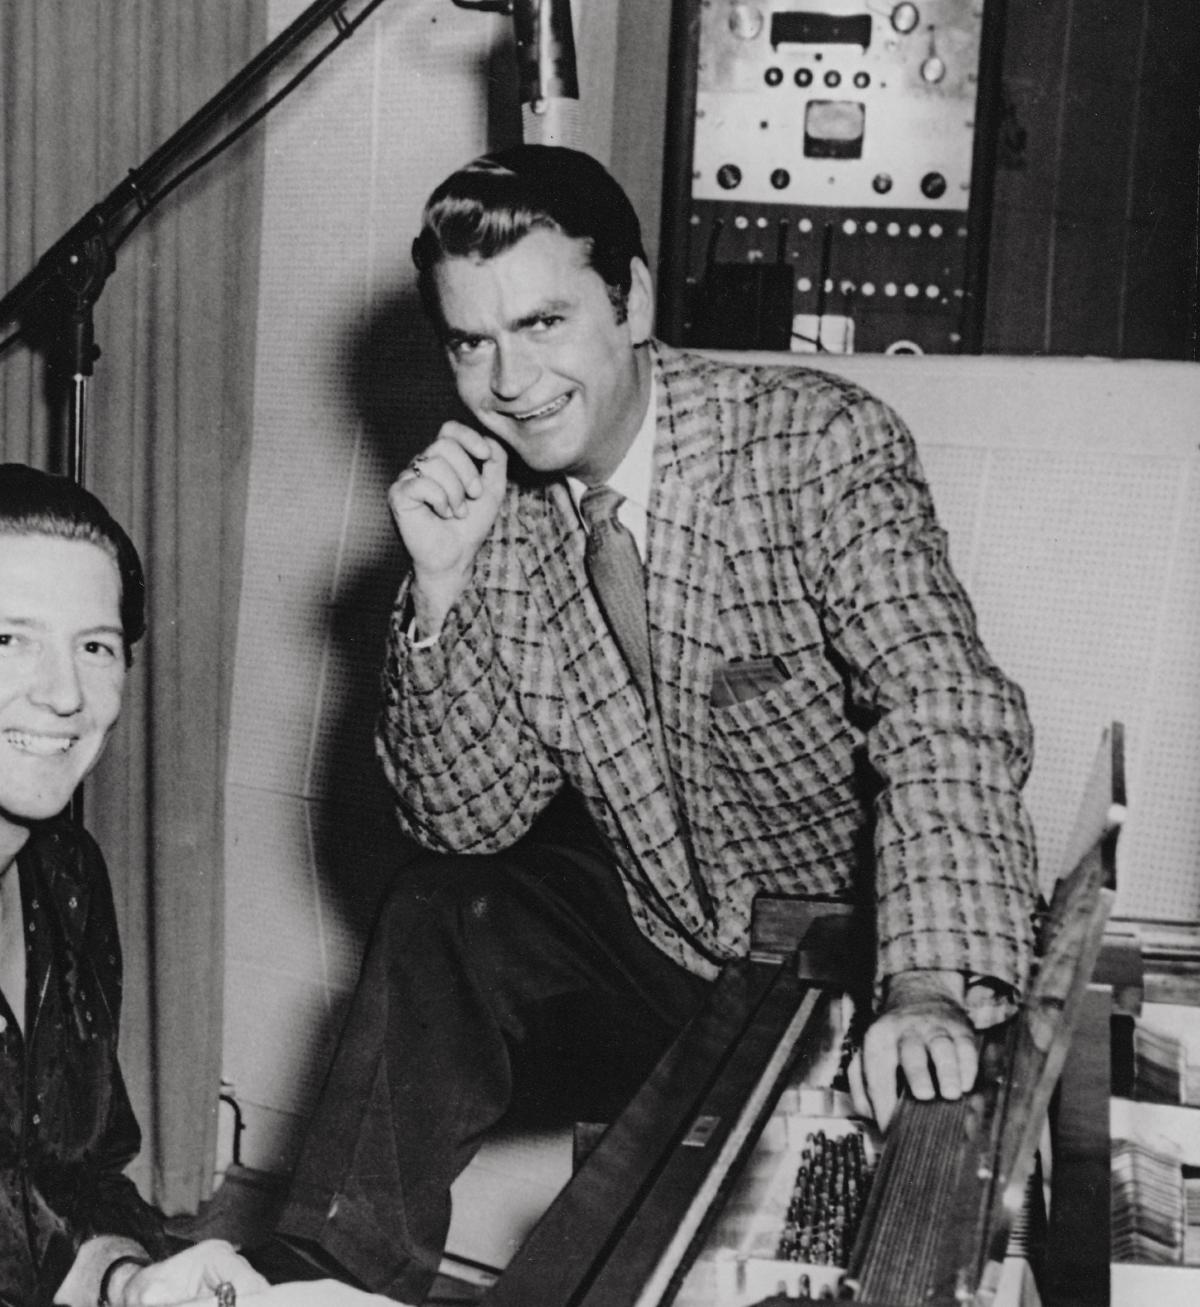 Sam Phillips in a checkered suit, resting his chin on his hand